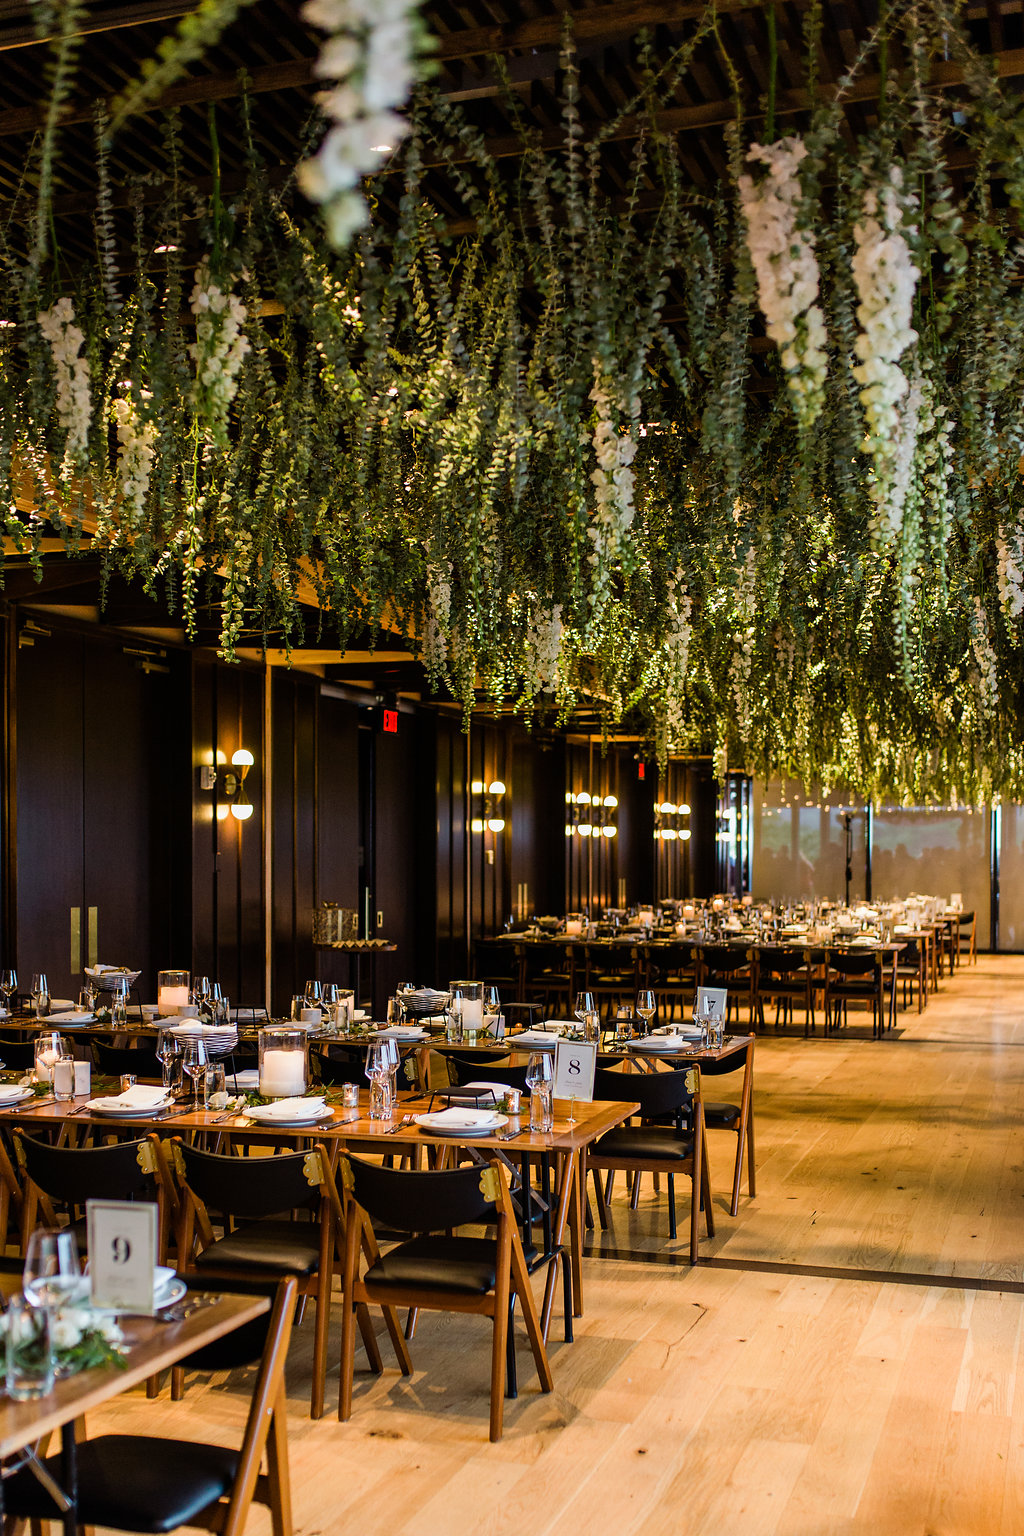 Wedding Reception with Hanging Eucalyptus at District Winery in Washington, DC